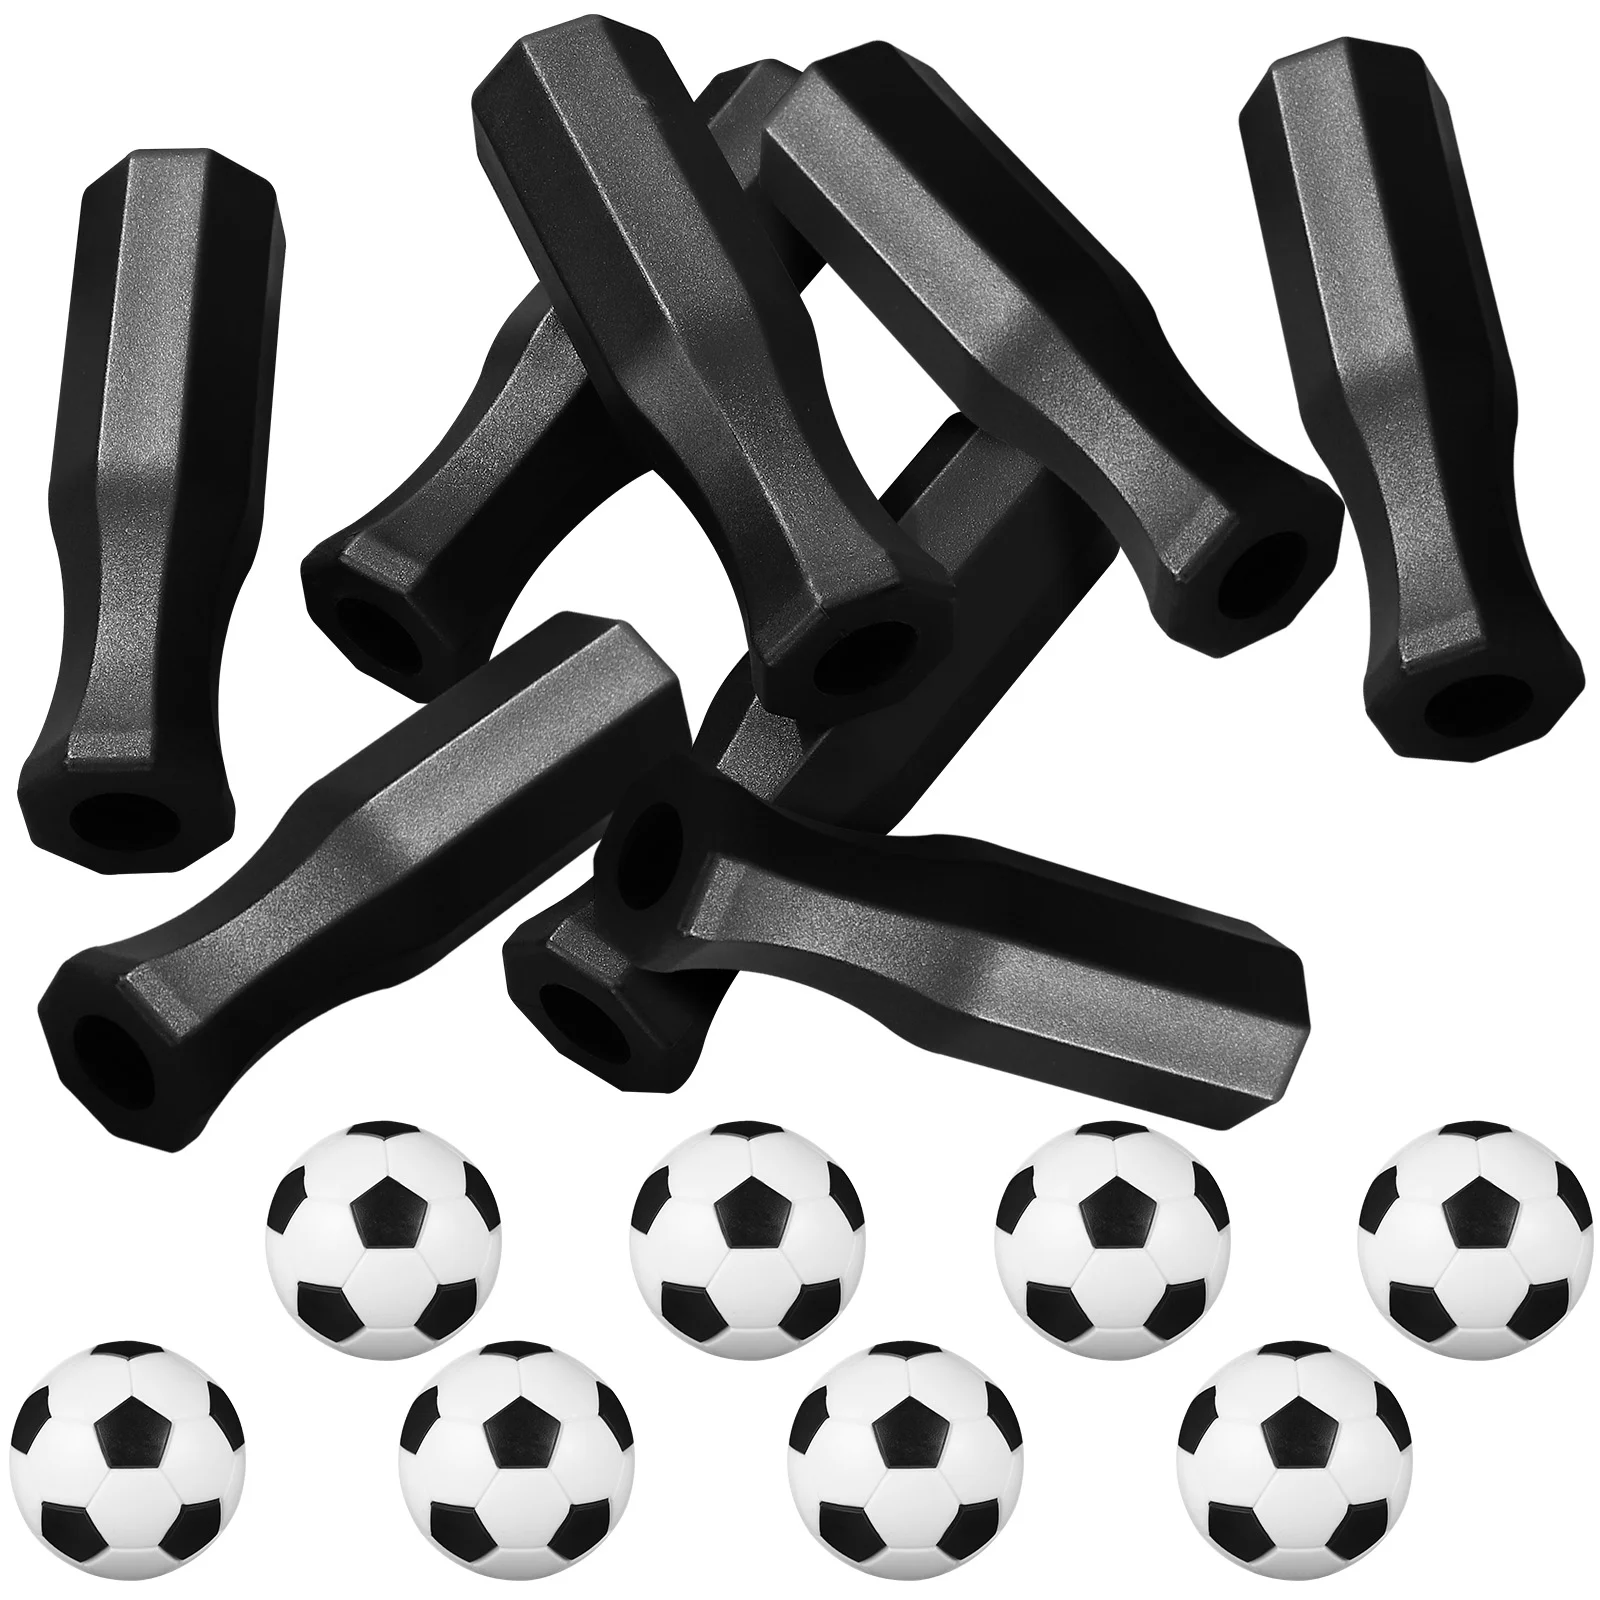 

Handle Foosball Supplies Household Grip Ergonomic Table Soccer Replaceable Handles Component Octagonal Replacement